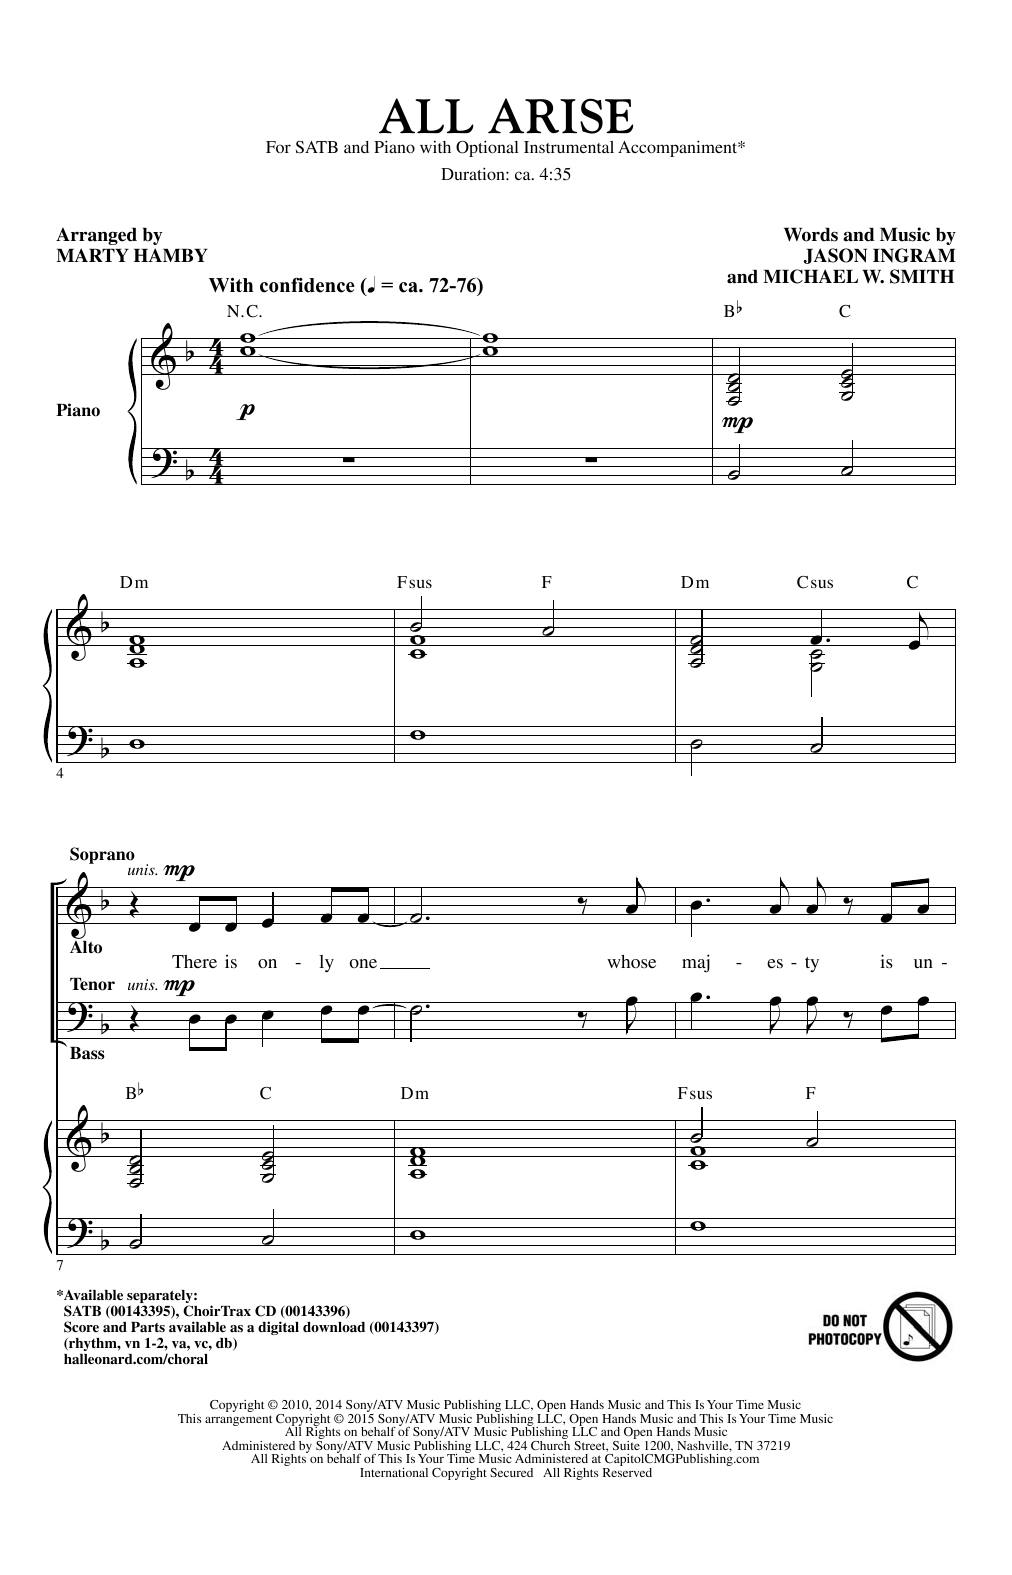 Download Marty Hamby All Arise Sheet Music